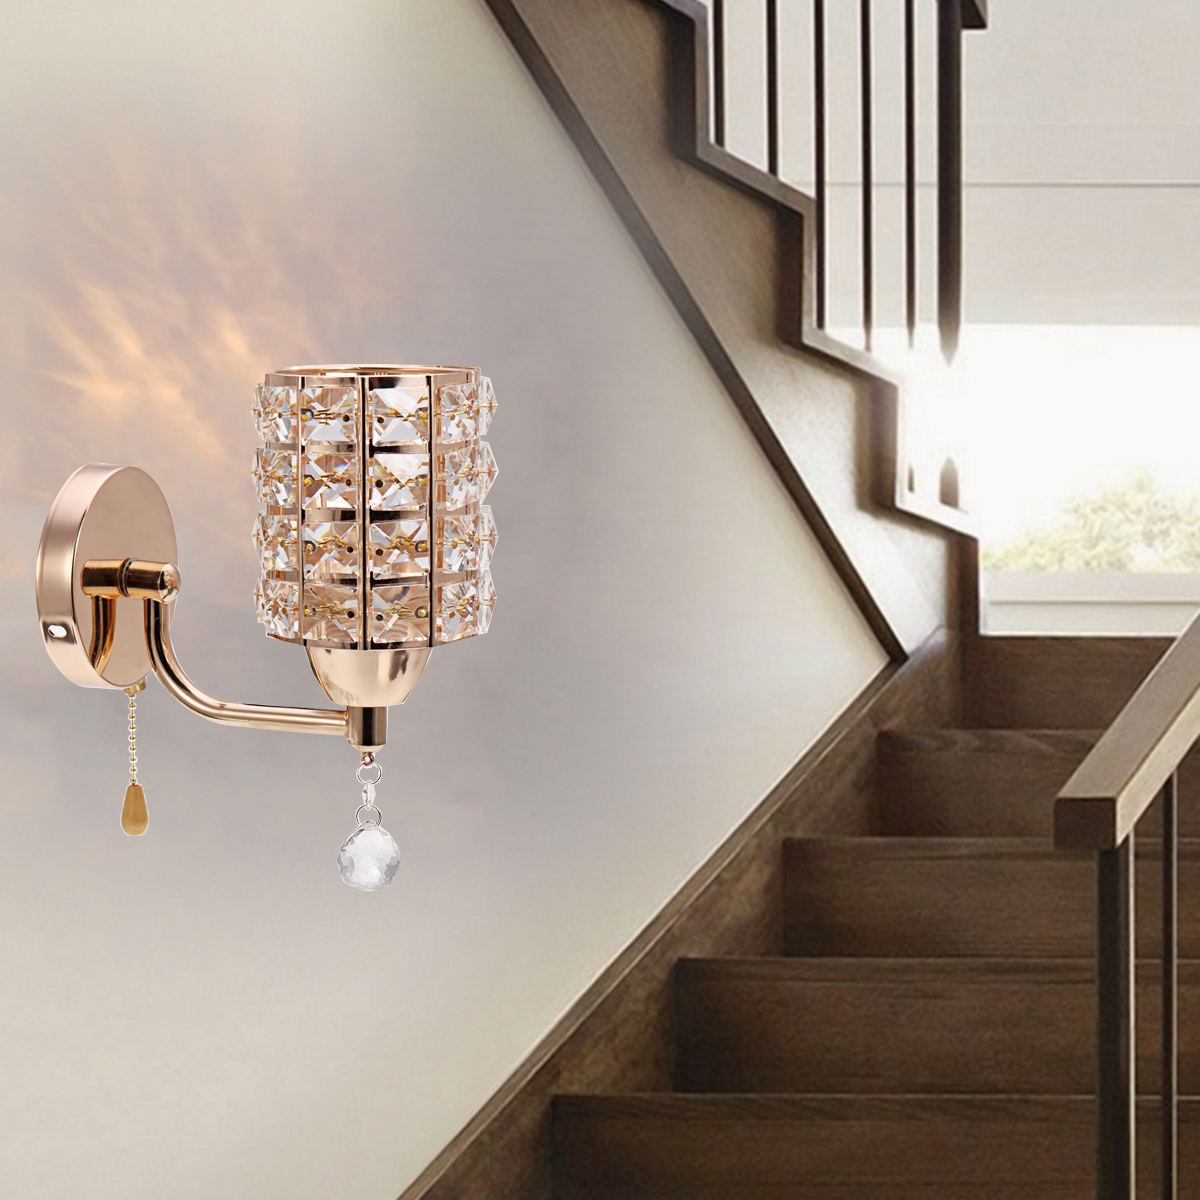 AC85-265V-Luxury-Crystal-Wall-Light-Modern-E27-Bedroom-Aisle-Sconce-Lighting-Lamp-Fixtures-Without-B-1794630-3